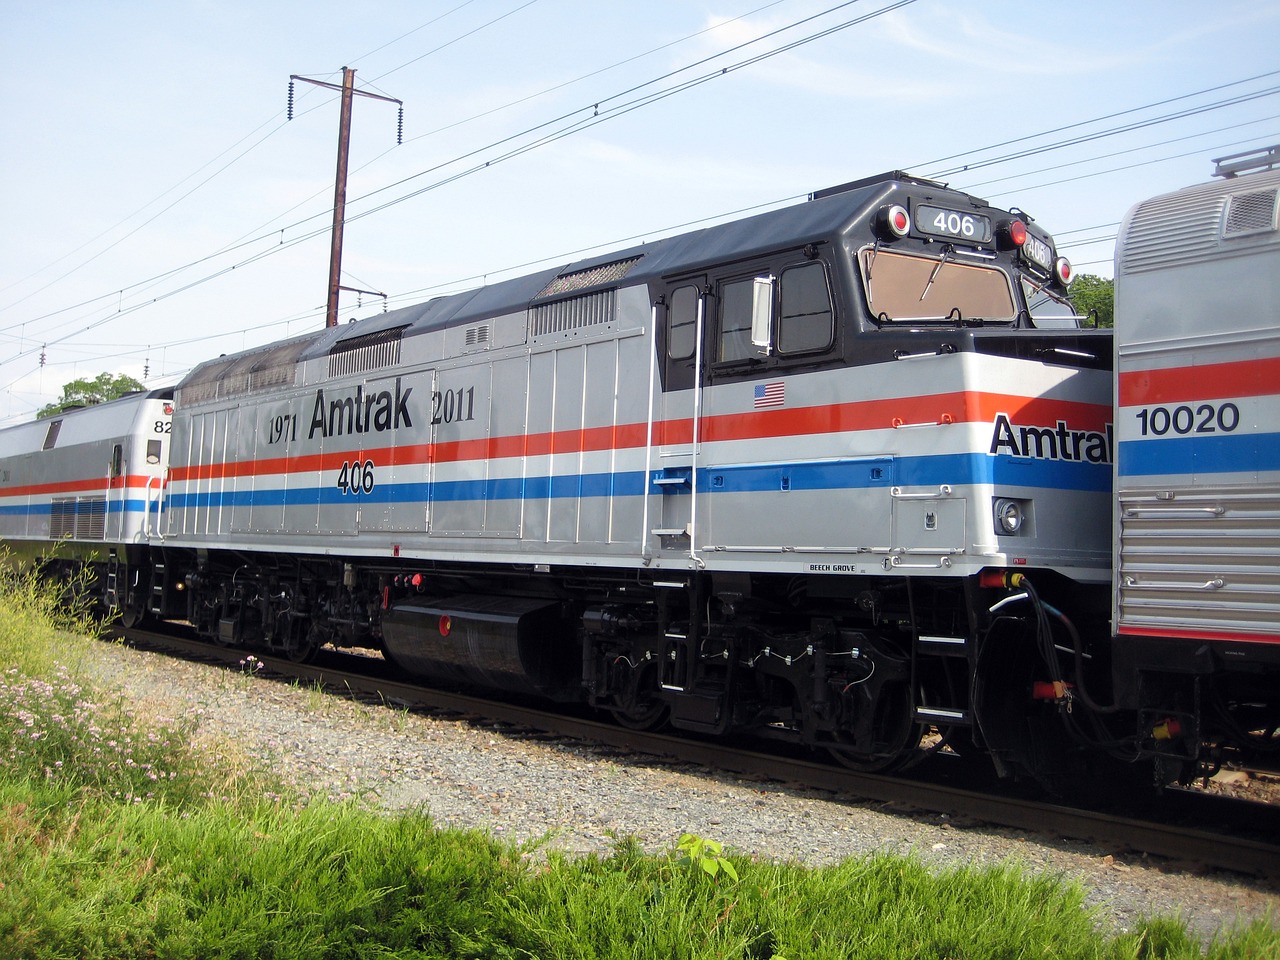 Image of amtrak train which can hold electric bikes